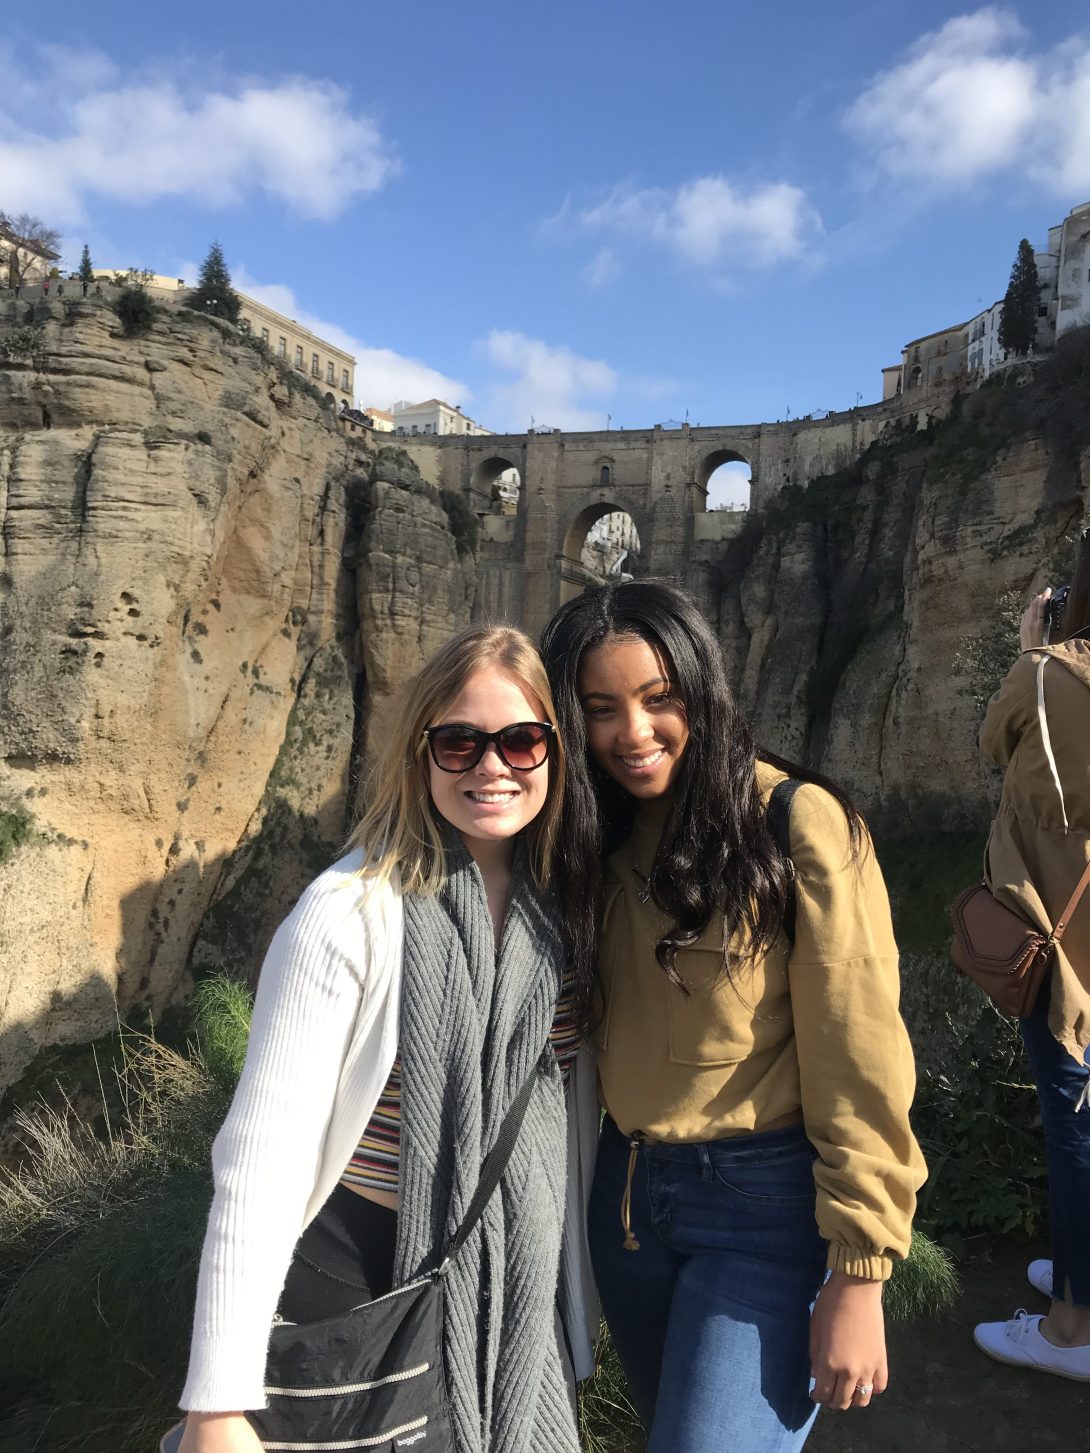 Students Studying Abroad